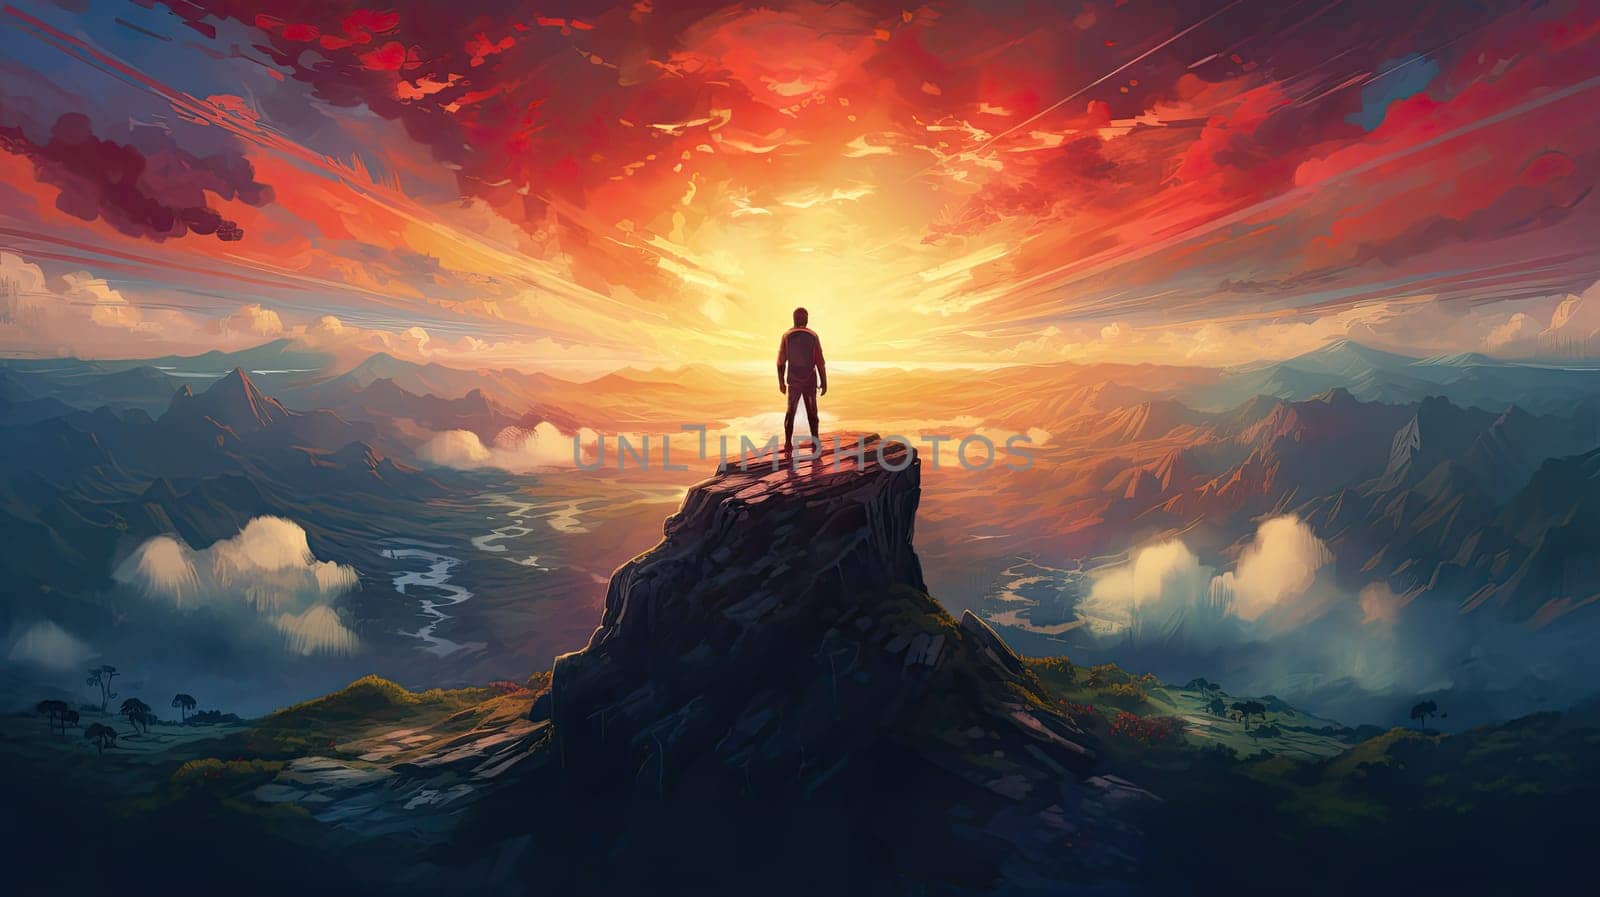 The emotional scene of success portrayed as a solitary figure standing atop a mountain peak, bathed in the warm glow of the rising sun, the landscape below painted with hues of accomplishment by Kadula